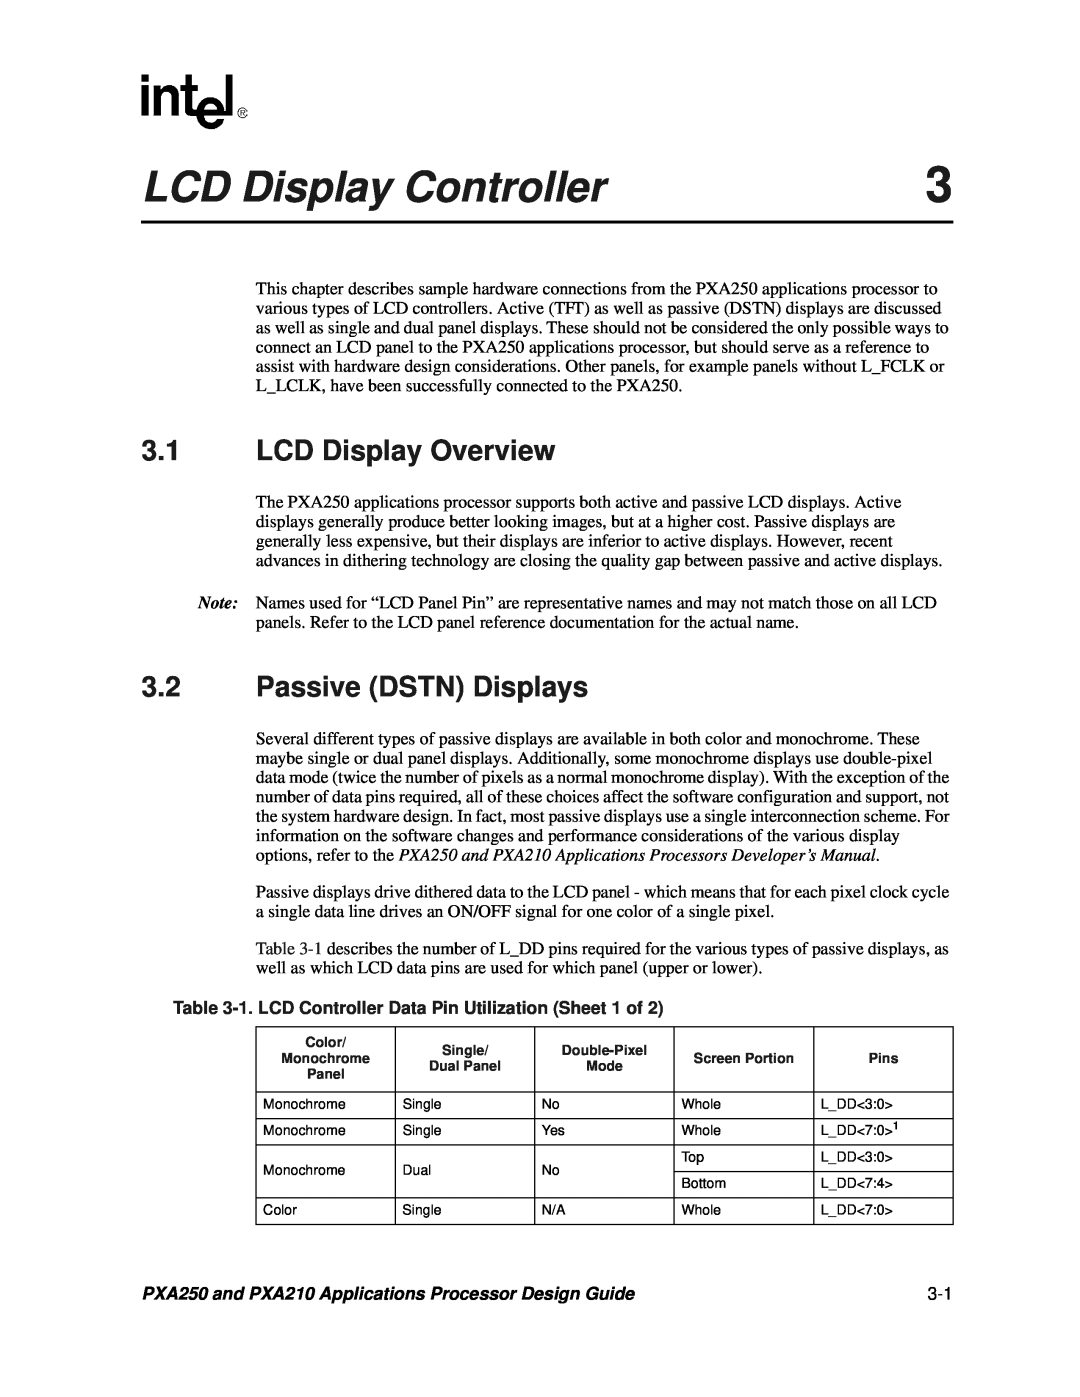 Intel PXA250 and PXA210 manual LCD Display Controller, LCD Display Overview, Passive DSTN Displays 